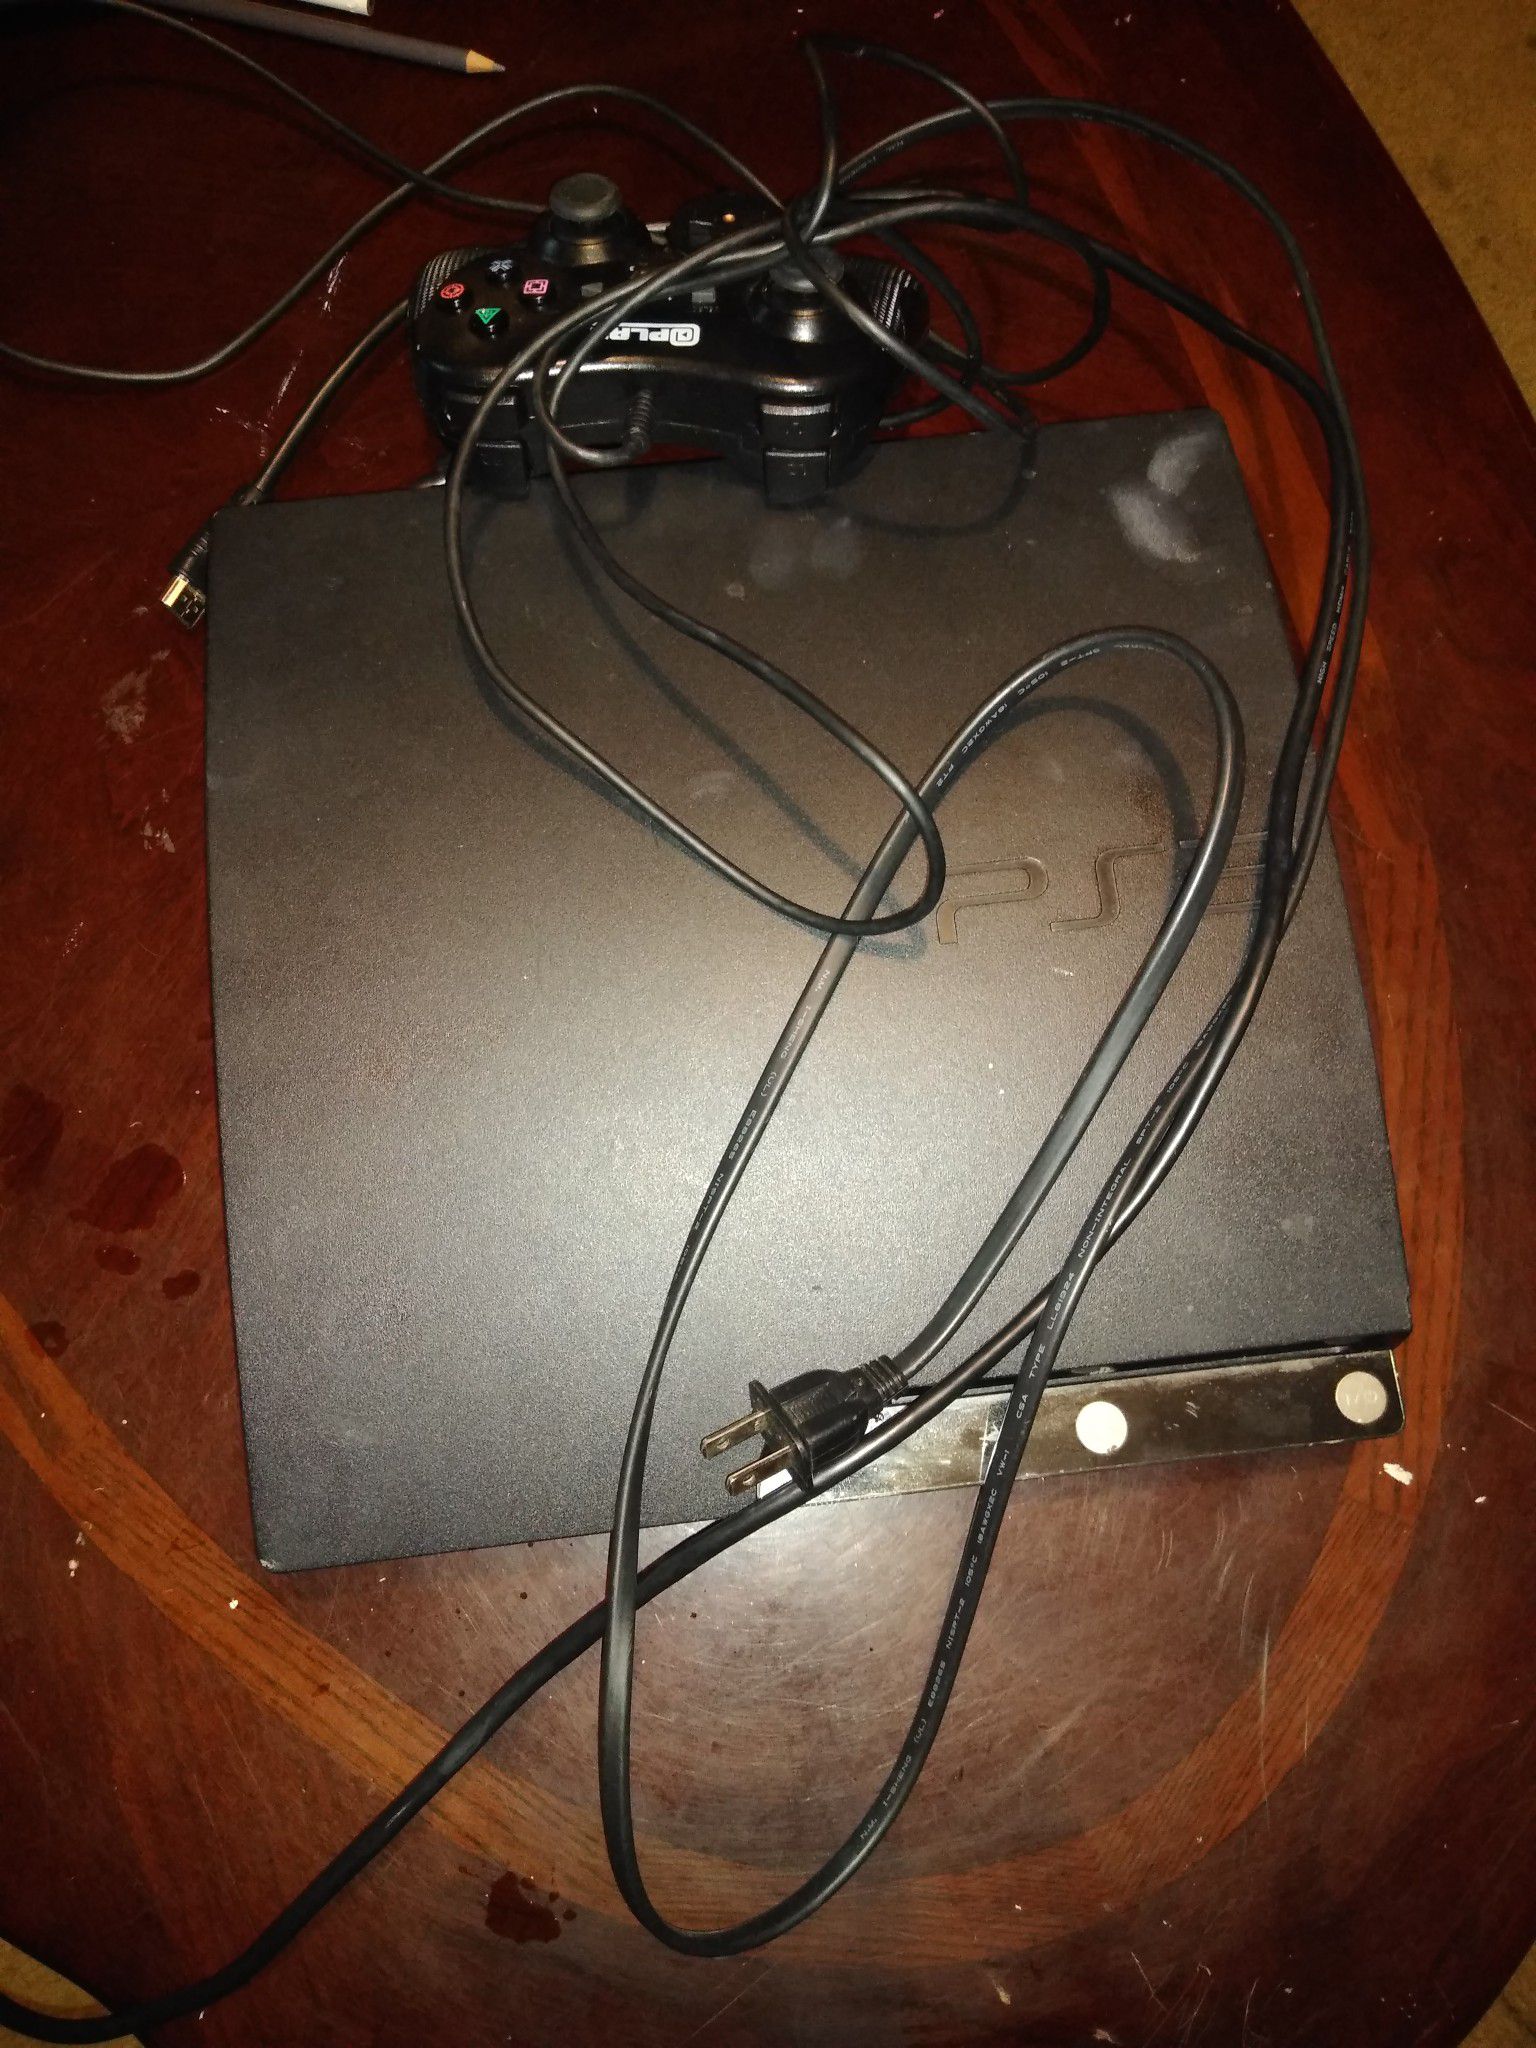 Ps3 in safe mode with cables and controller